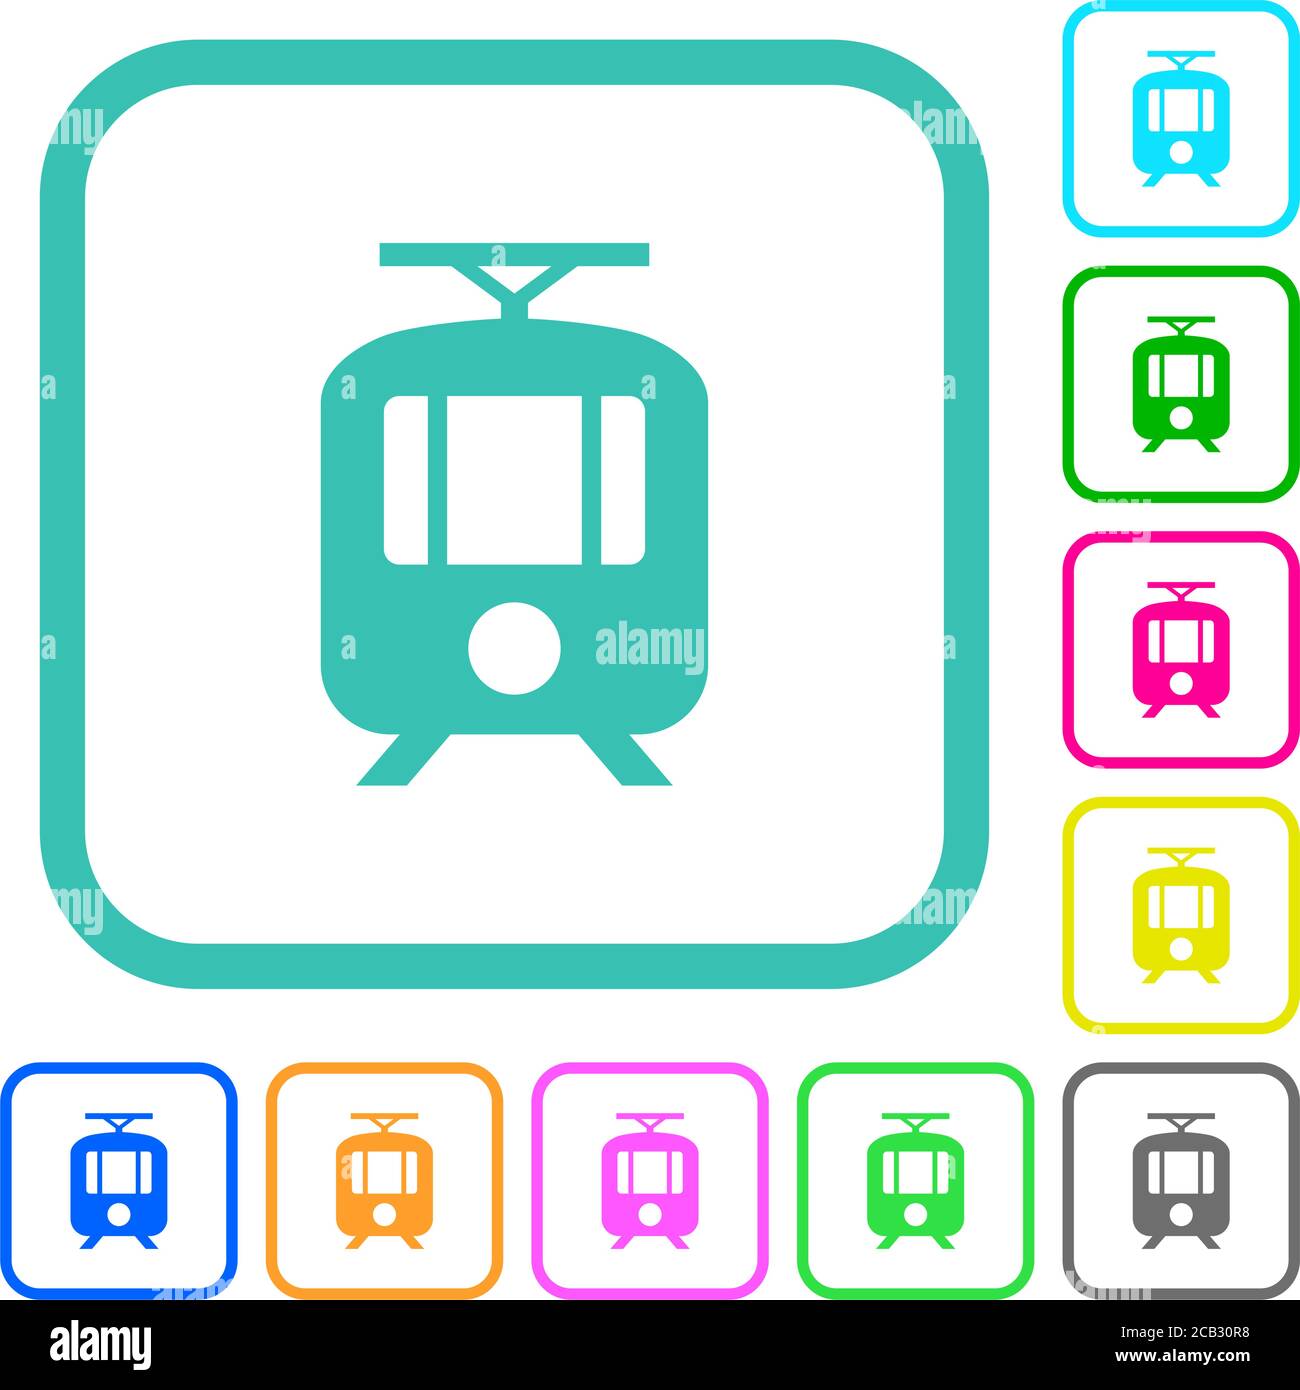 Tram vivid colored flat icons in curved borders on white background Stock Vector